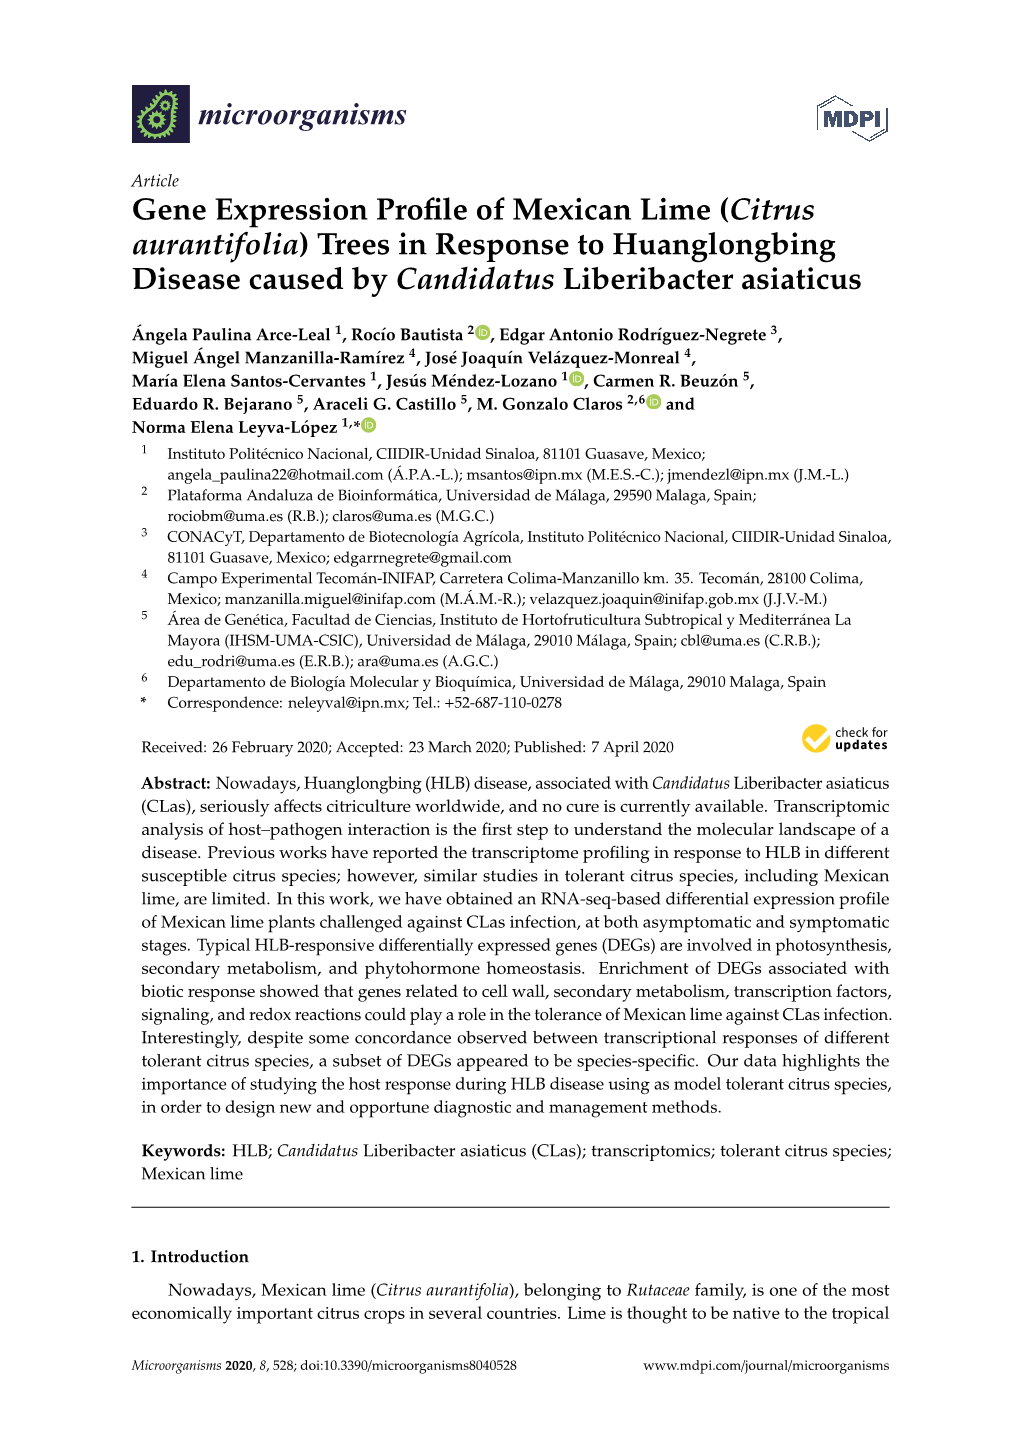 Gene Expression Profile of Mexican Lime (Citrus Aurantifolia) Trees In